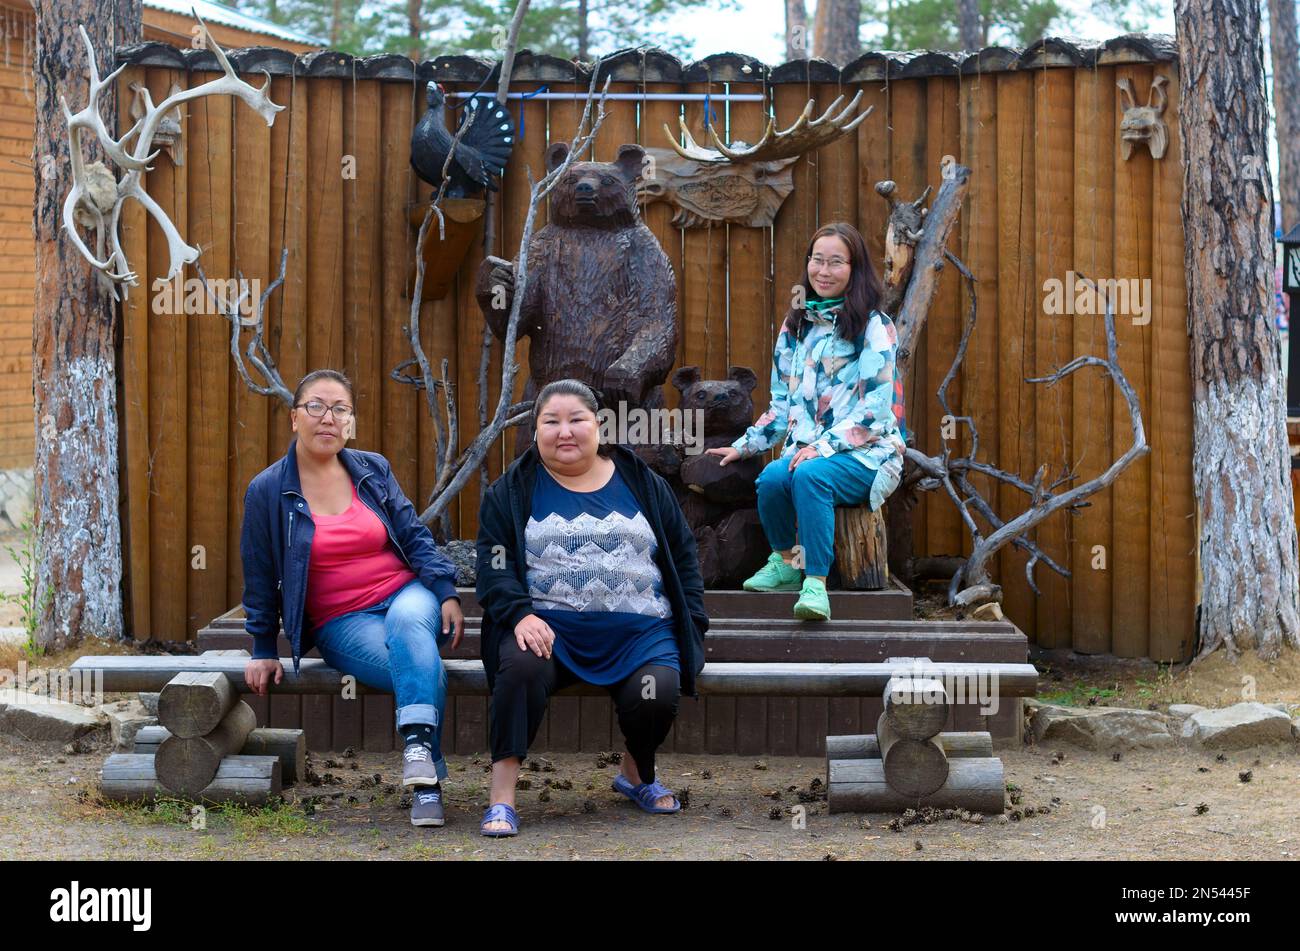 Three colorful girls Asian Yakut sitting on a bench in the zoo at the wooden sculptures of bears and other animals in the village of Ustye in Yakutia. Stock Photo